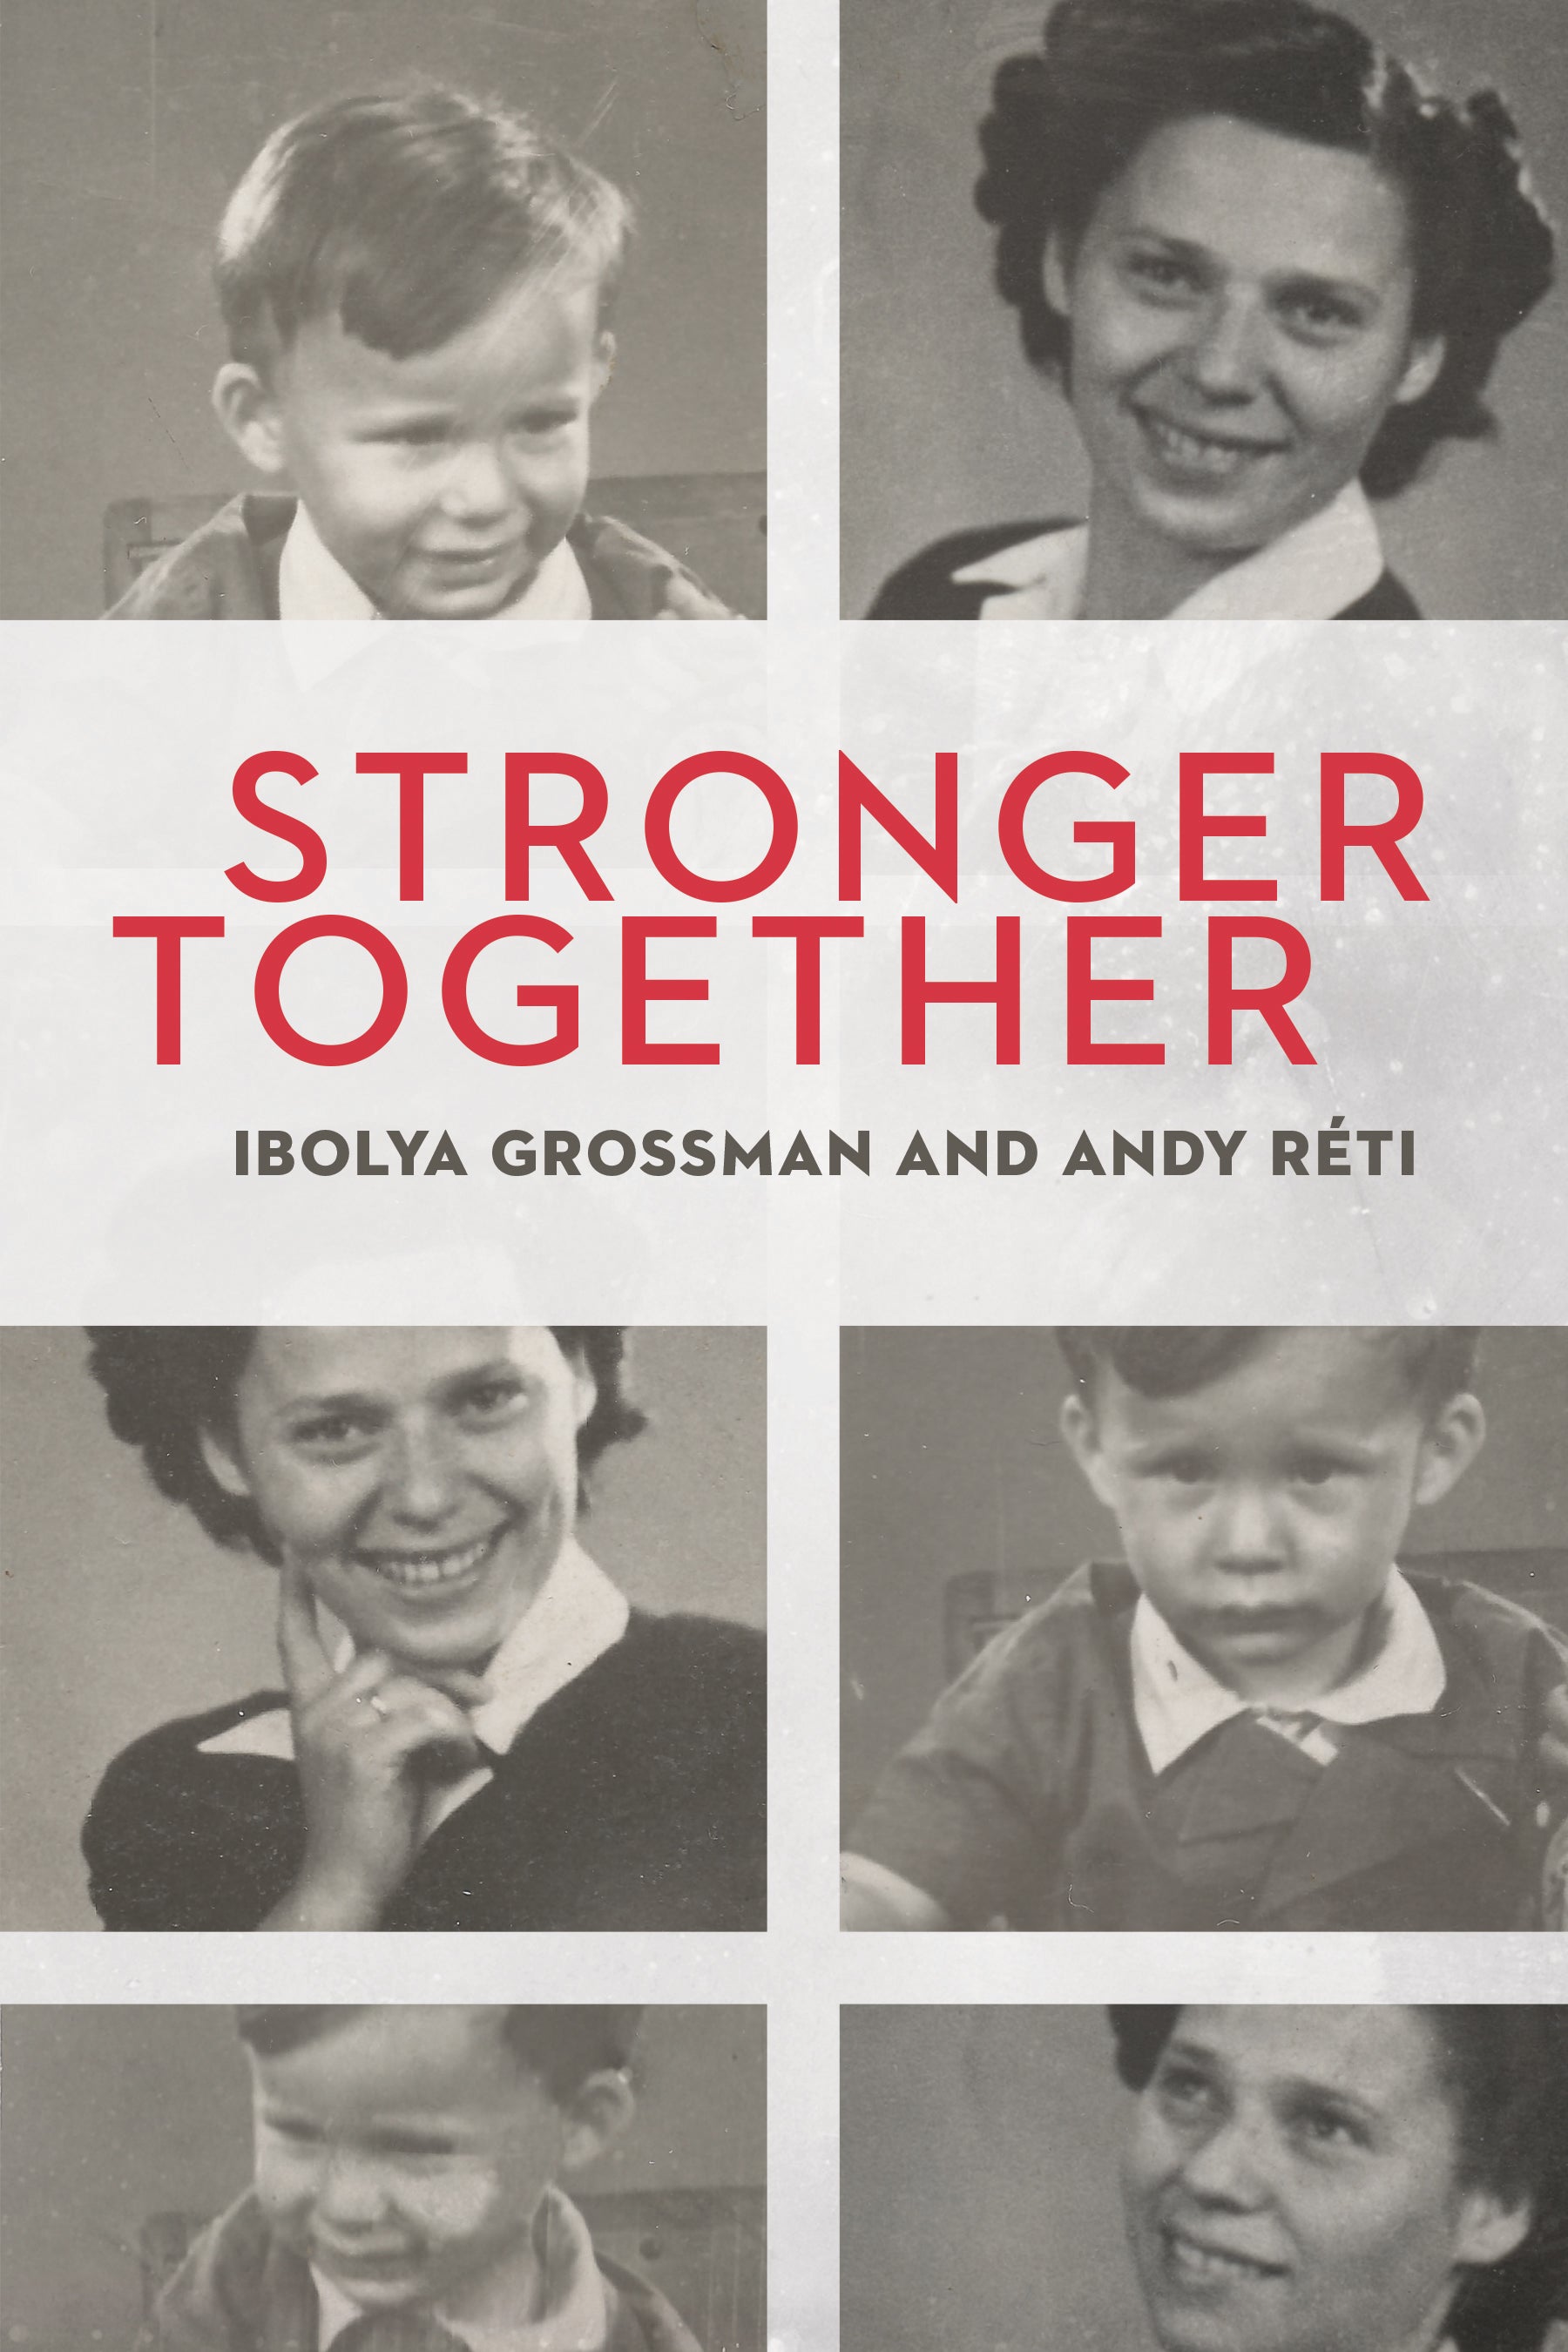 Strongest together - Hope Inc. Stories